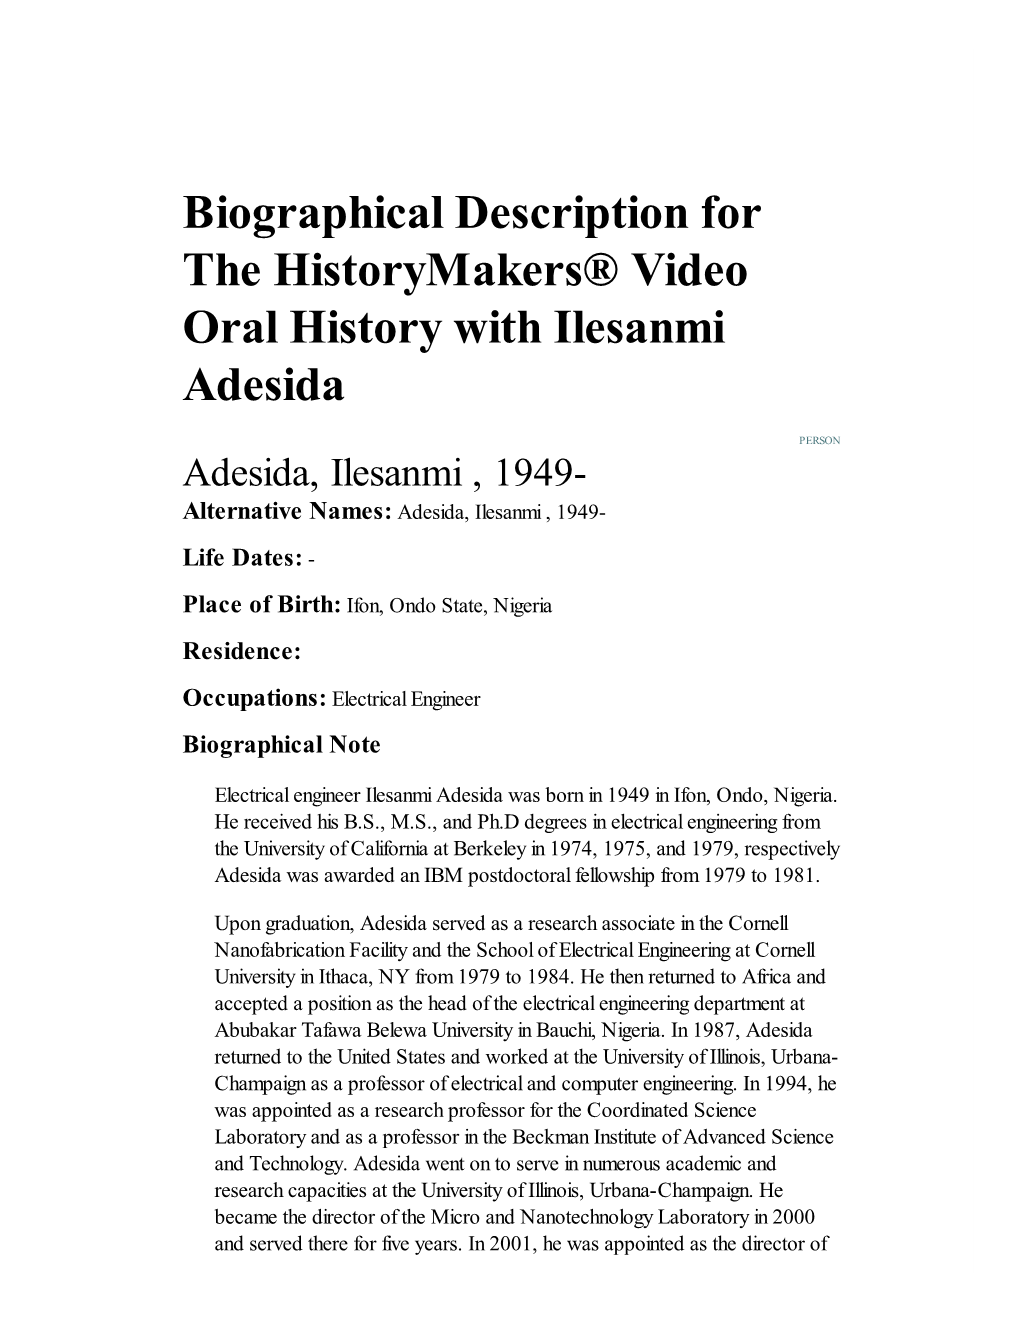 Biographical Description for the Historymakers® Video Oral History with Ilesanmi Adesida